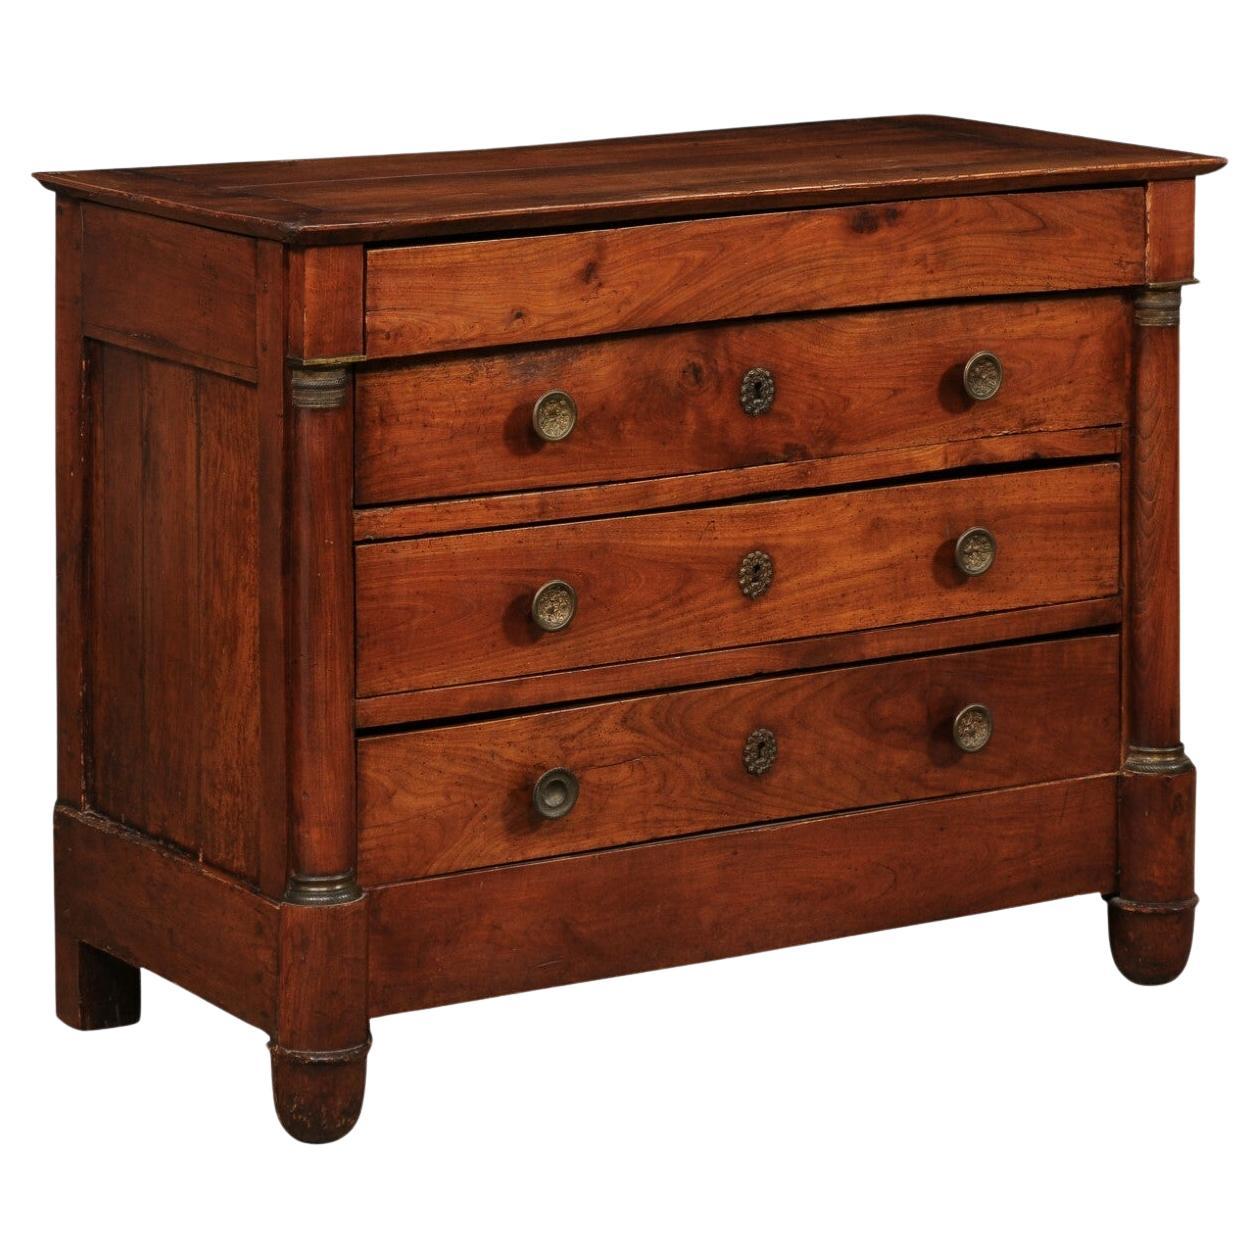 Neoclassic French Wooden Commode w/its Original Hardware, 19th Century For Sale